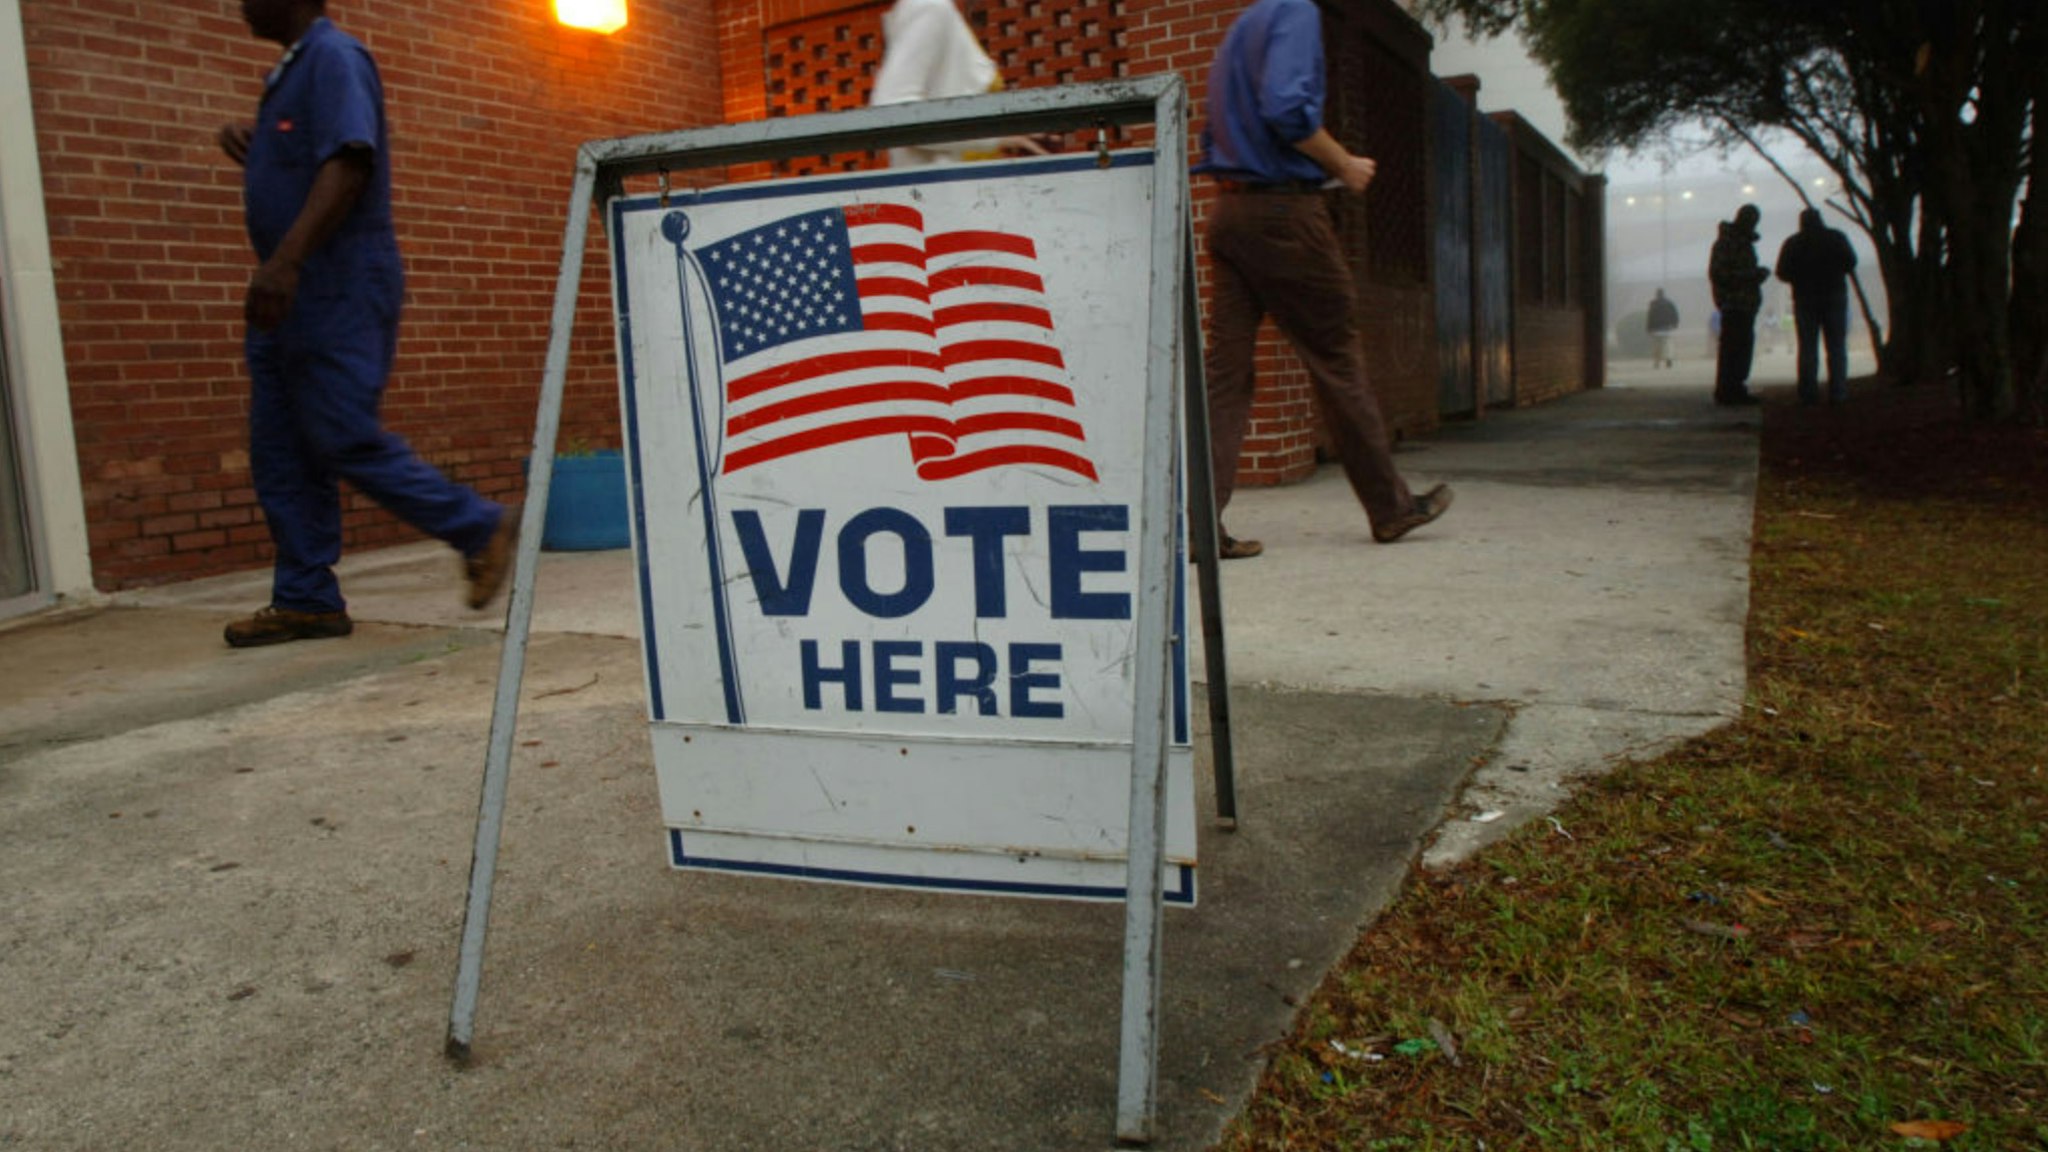 Voters leave a precinct after casting their ballots during Georgia's primary Super Tuesday's presidential election January 5, 2008 in Savannah, Georgia.